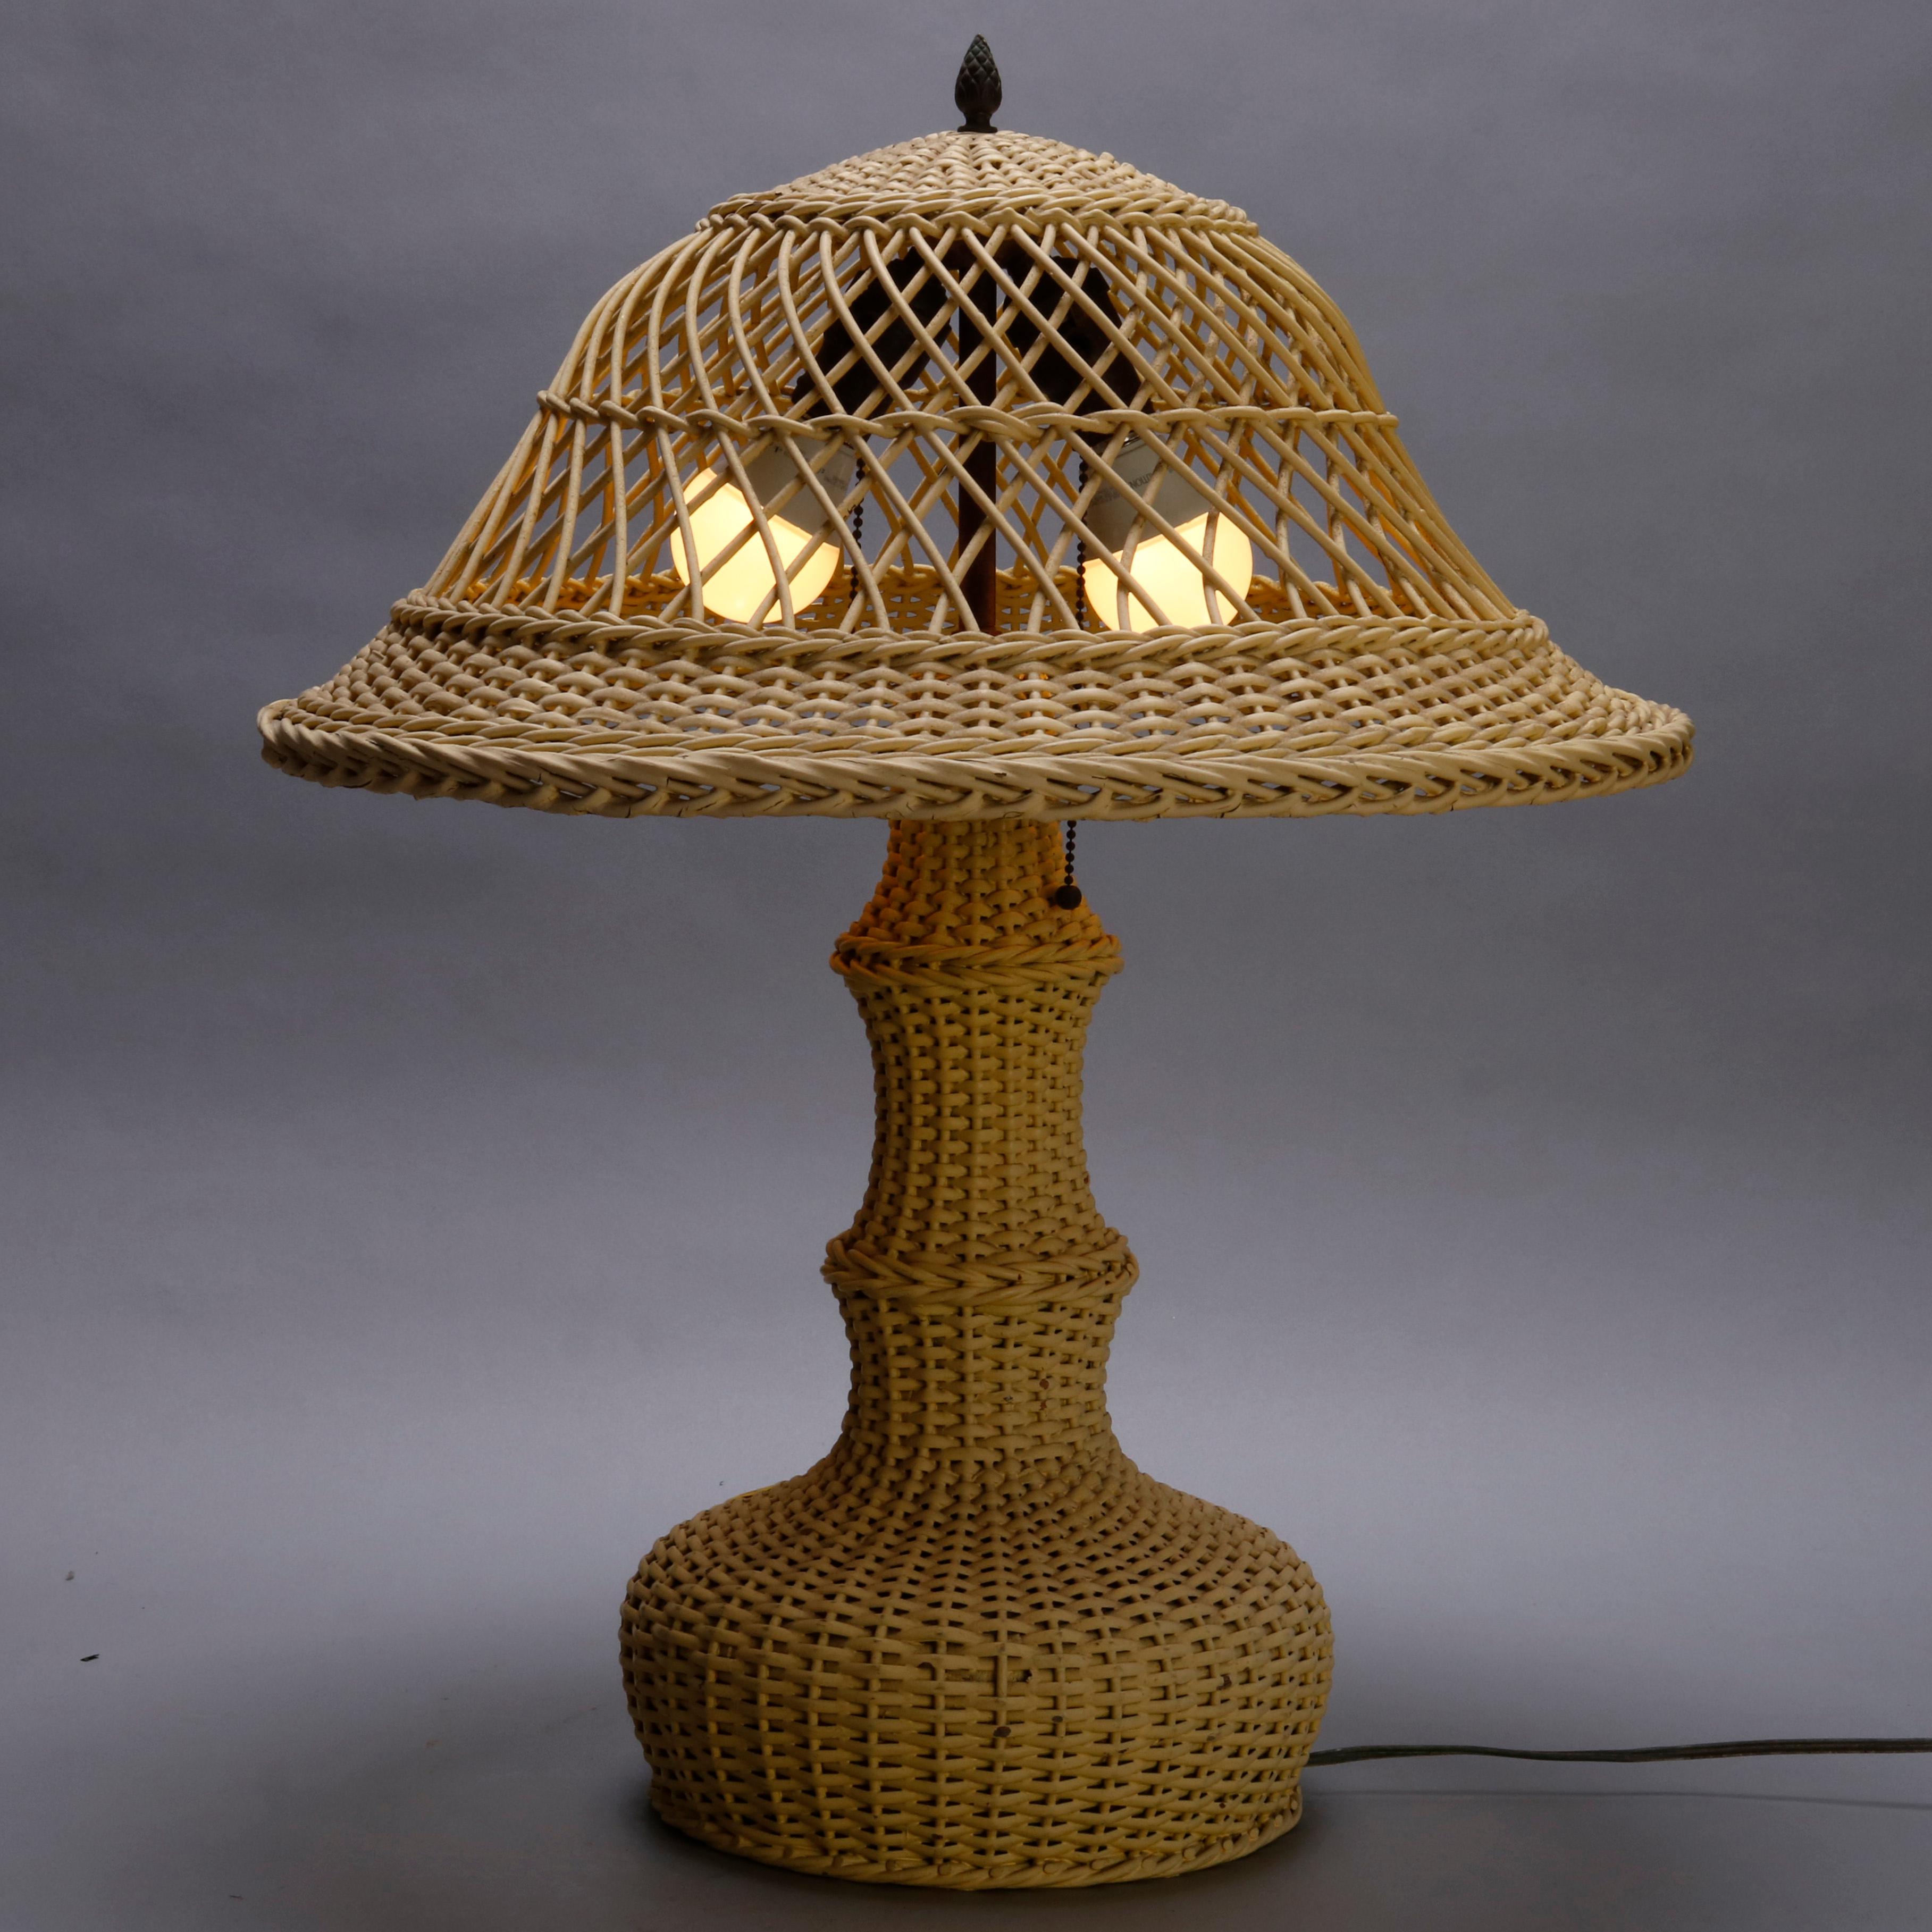 An antique Arts & Crafts Heywood Wakefield School table lamp offers painted wicker construction with open weave dome form shade with acorn finial over bottle form double socket base, circa 1920

***DELIVERY NOTICE – Due to COVID-19 we are employing